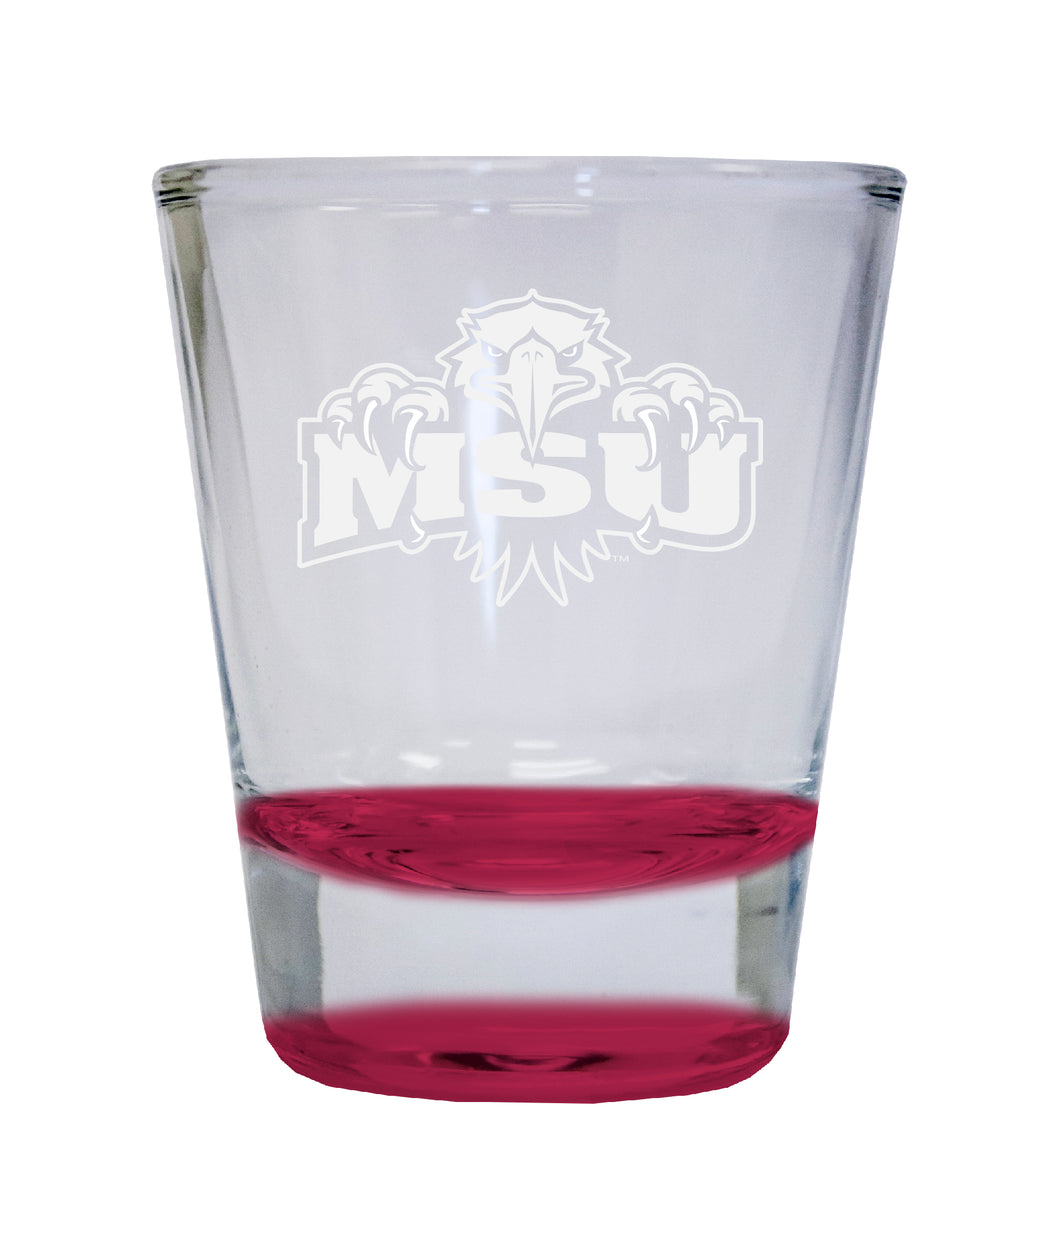 Morehead State University Etched Round Shot Glass 2 oz Red